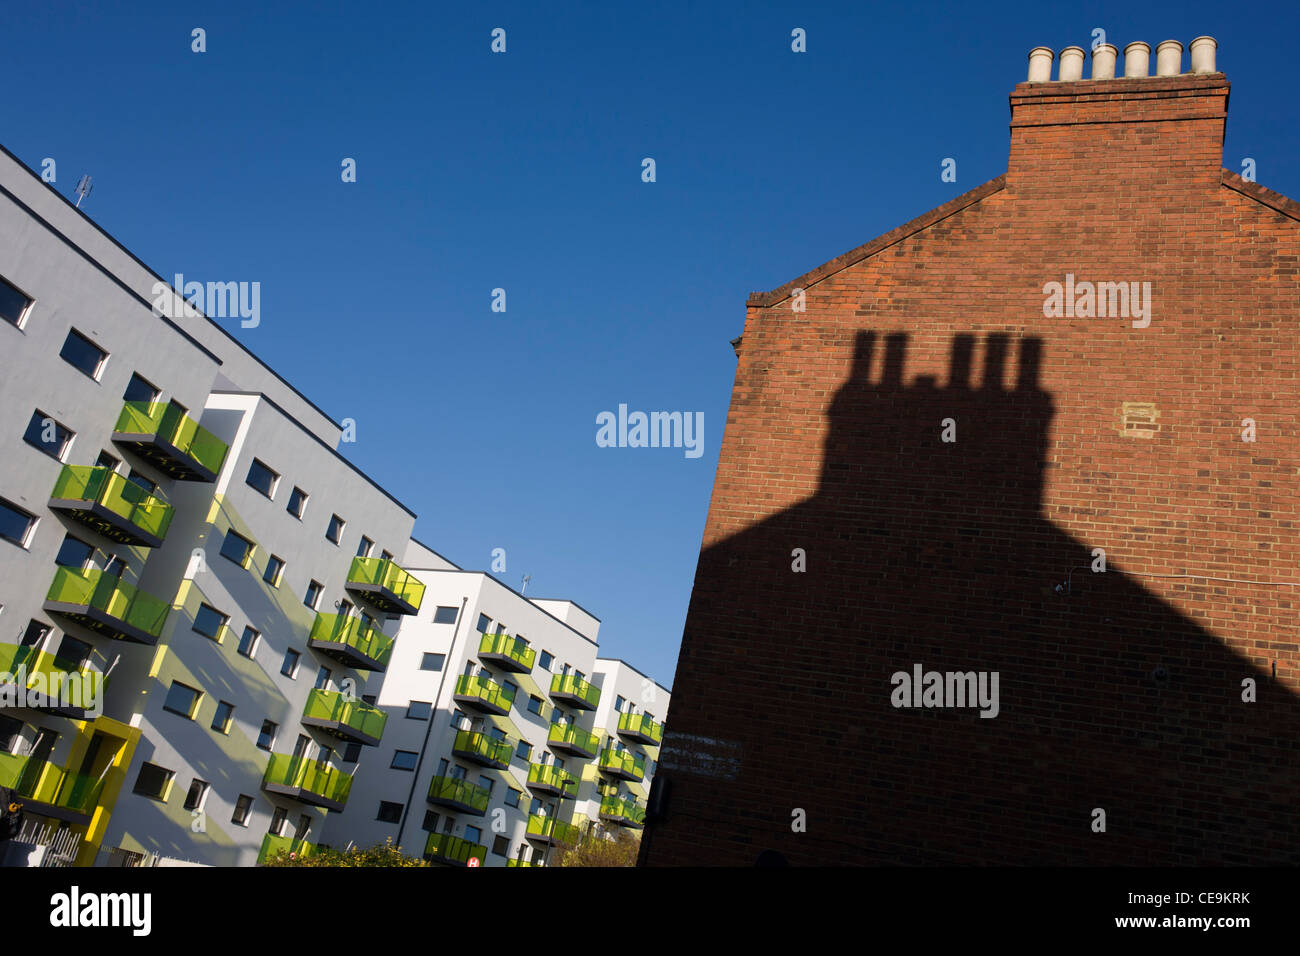 New apartments in a block developed by Skanska in Coldharbour Lane in Camberwell, Lambeth, South London Stock Photo